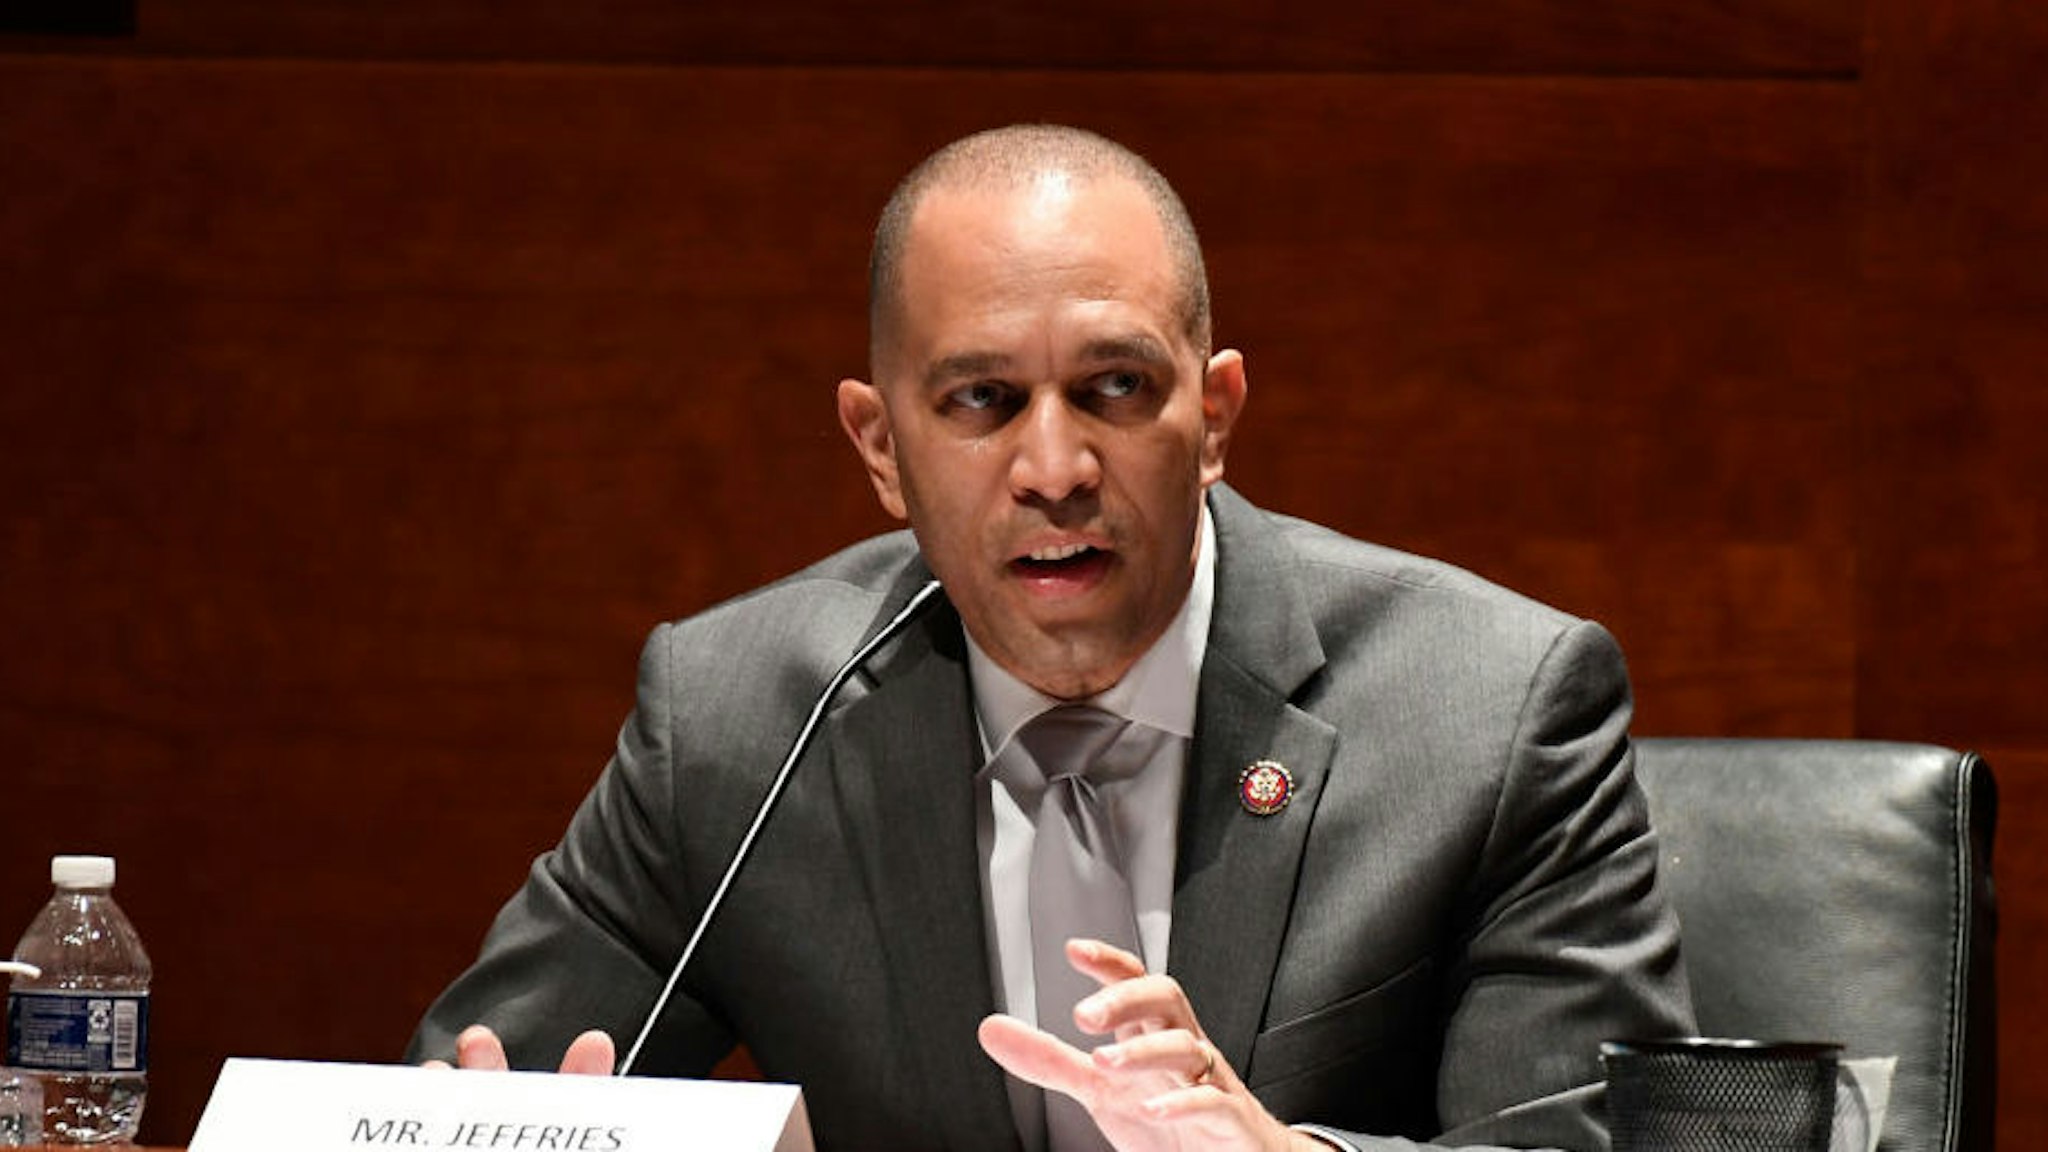 WASHINGTON, DC - JUNE 24: Rep. Hakeem Jeffries (D-NY) speaks during a House Judiciary Committee hearing on oversight of the Justice Department and a probe into the politicization of the department under Attorney General William Barr on Capitol Hill, June 24, 2020 in Washington, DC.